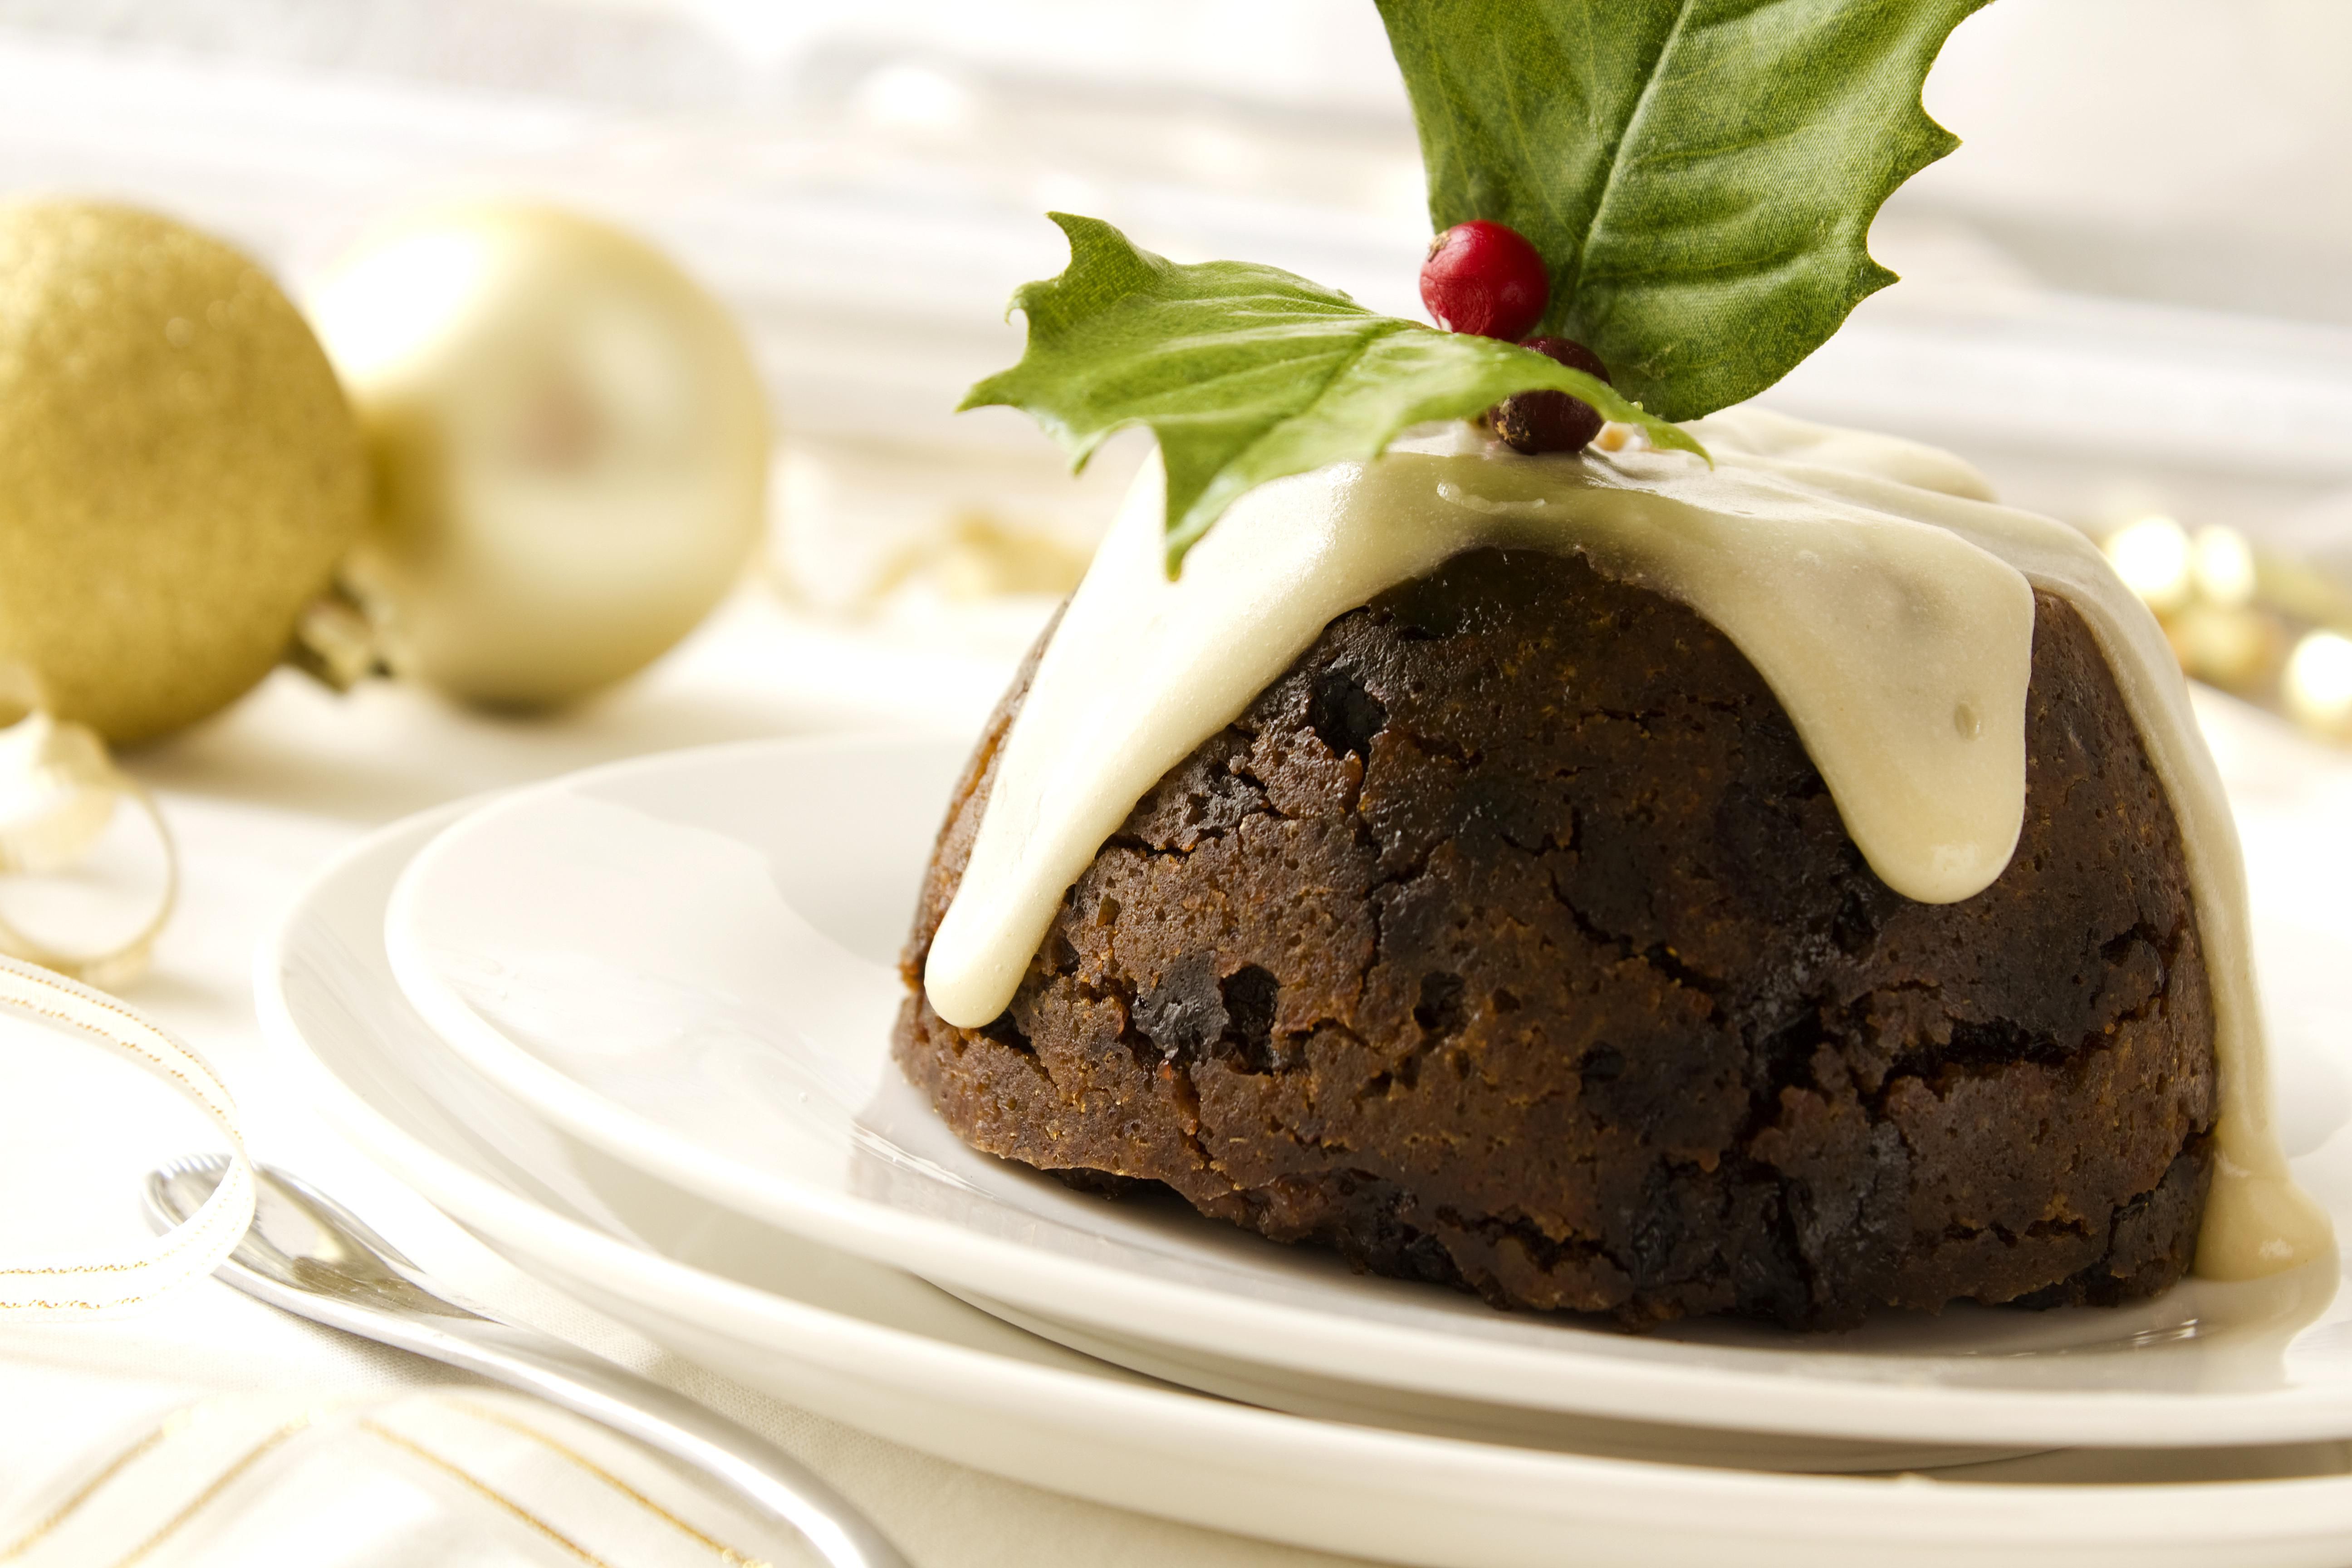 3 Traditional Sauces for Your Christmas Pudding